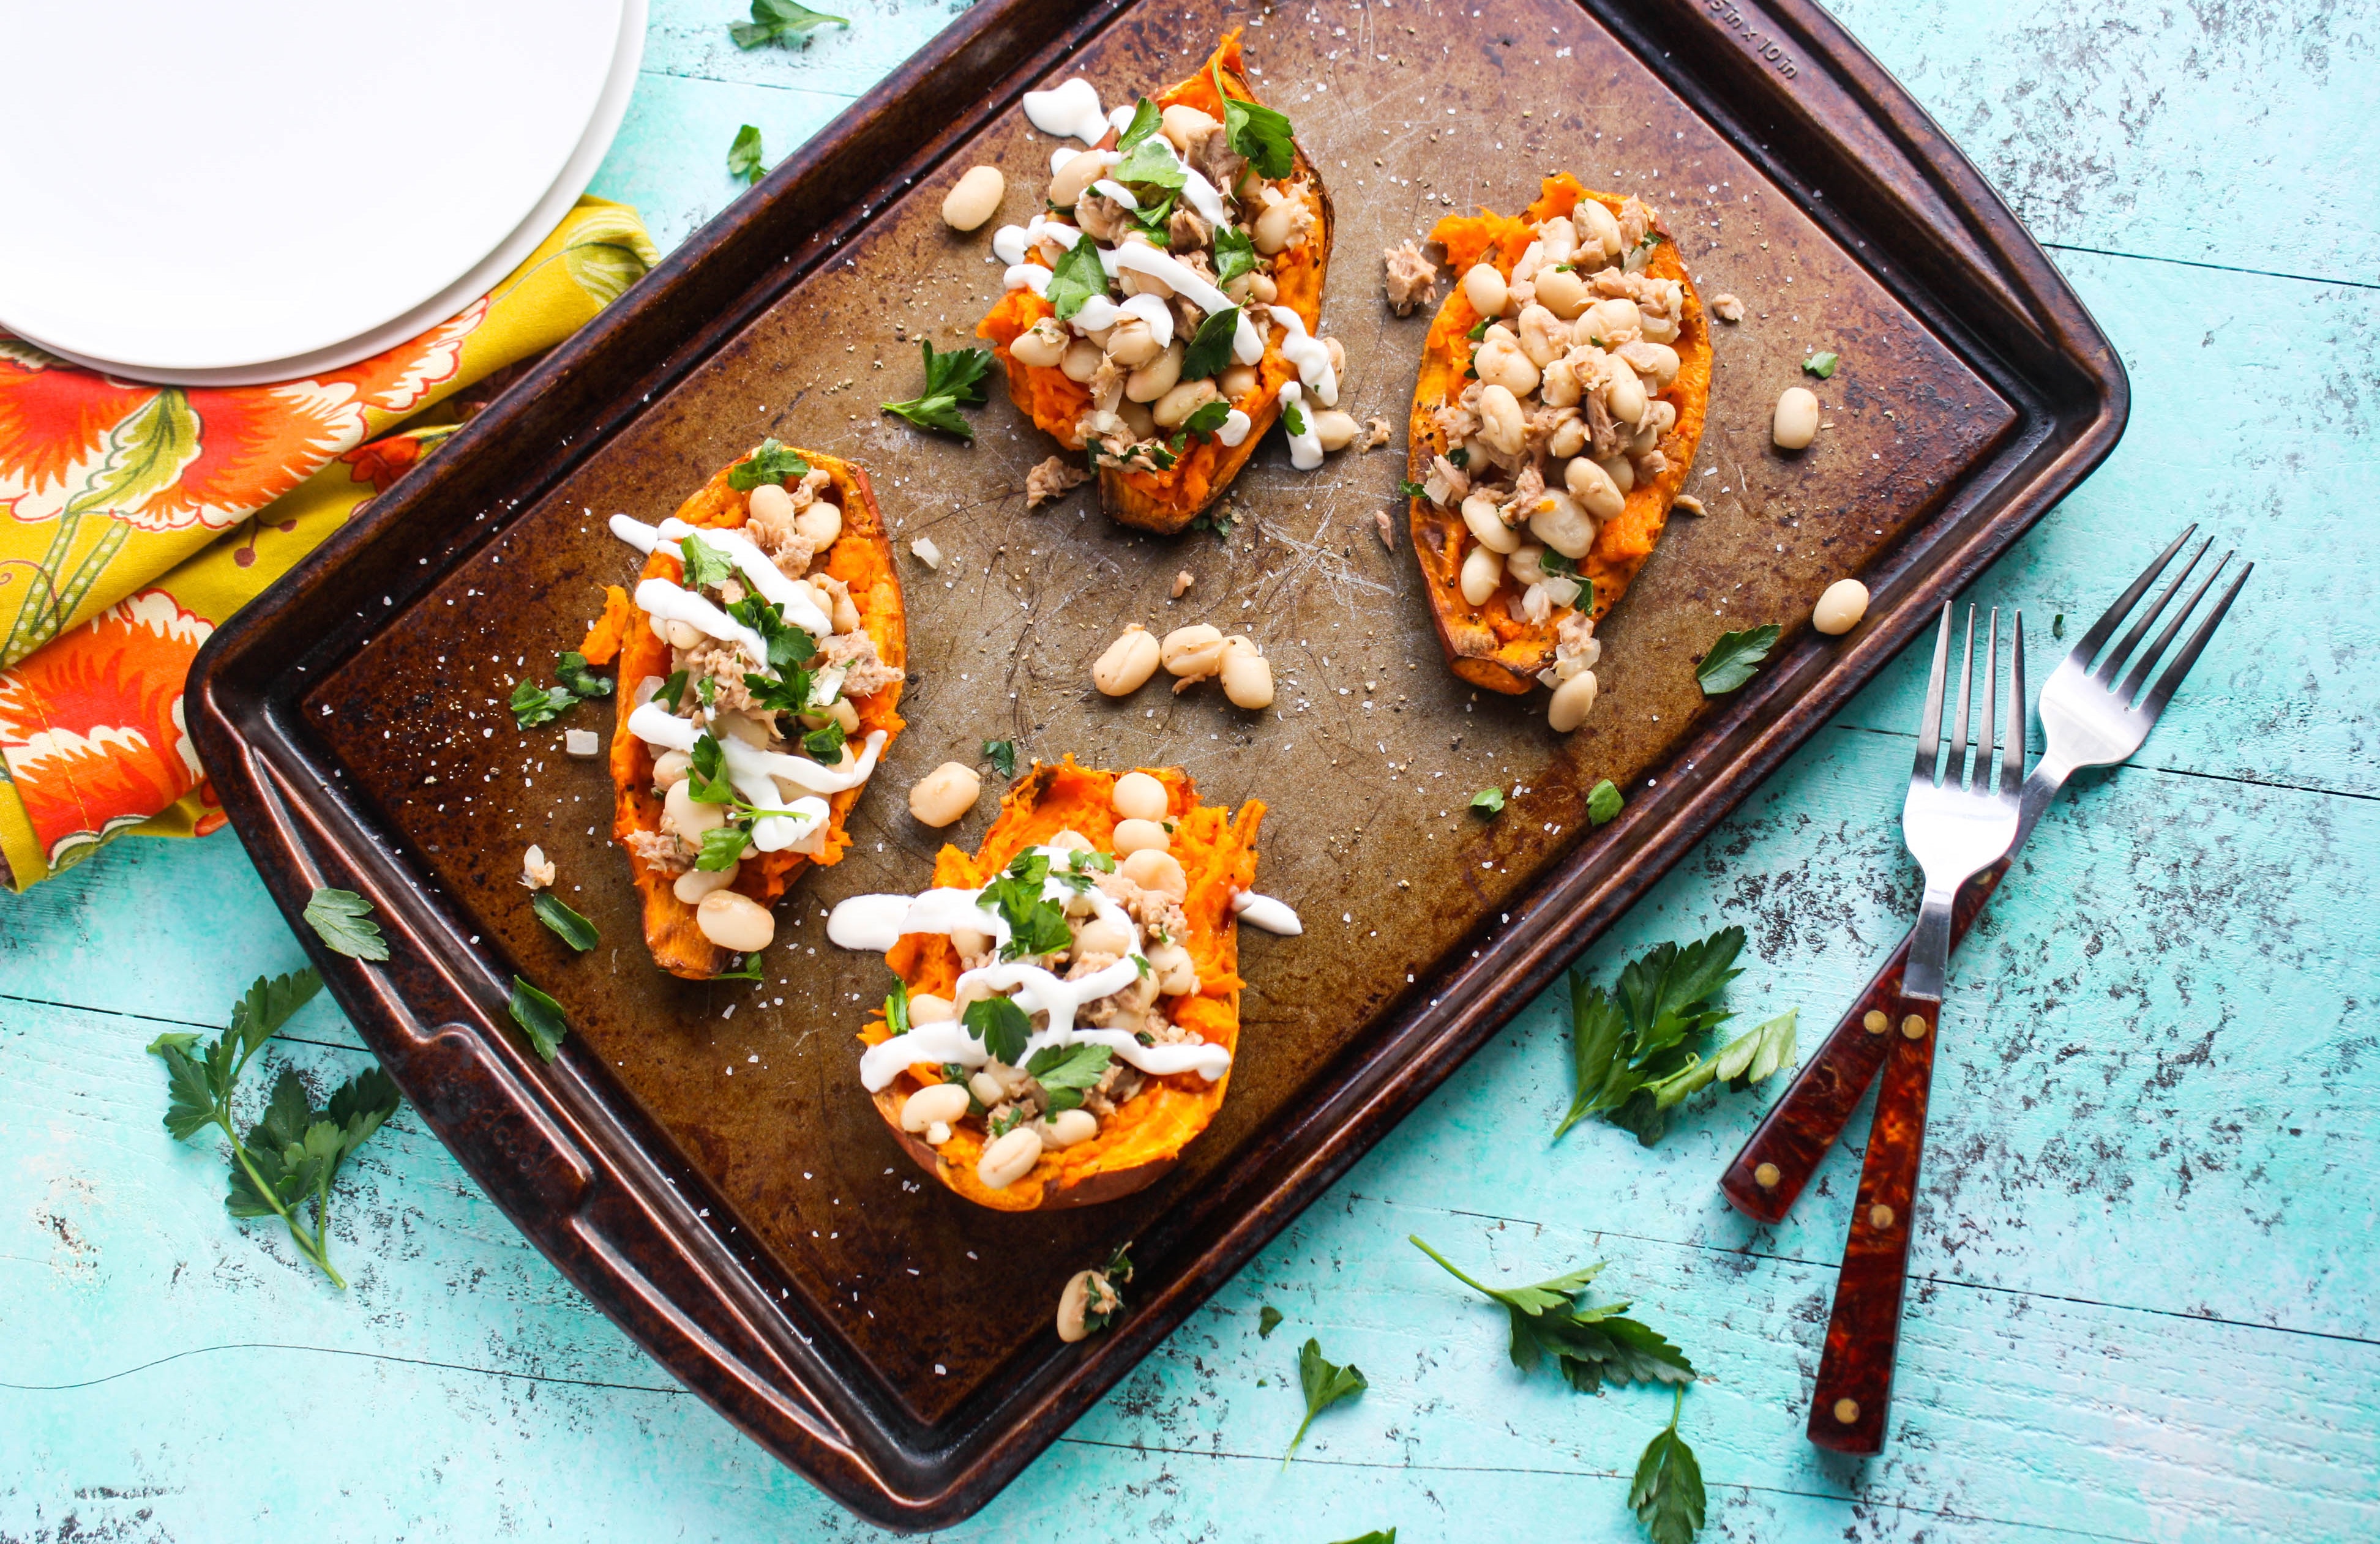 Stuffed Sweet Potatoes with Tuna and Beans make a fabulous meatless meal. These stuffed sweet potatoes are perfect along with the tuna and beans. 